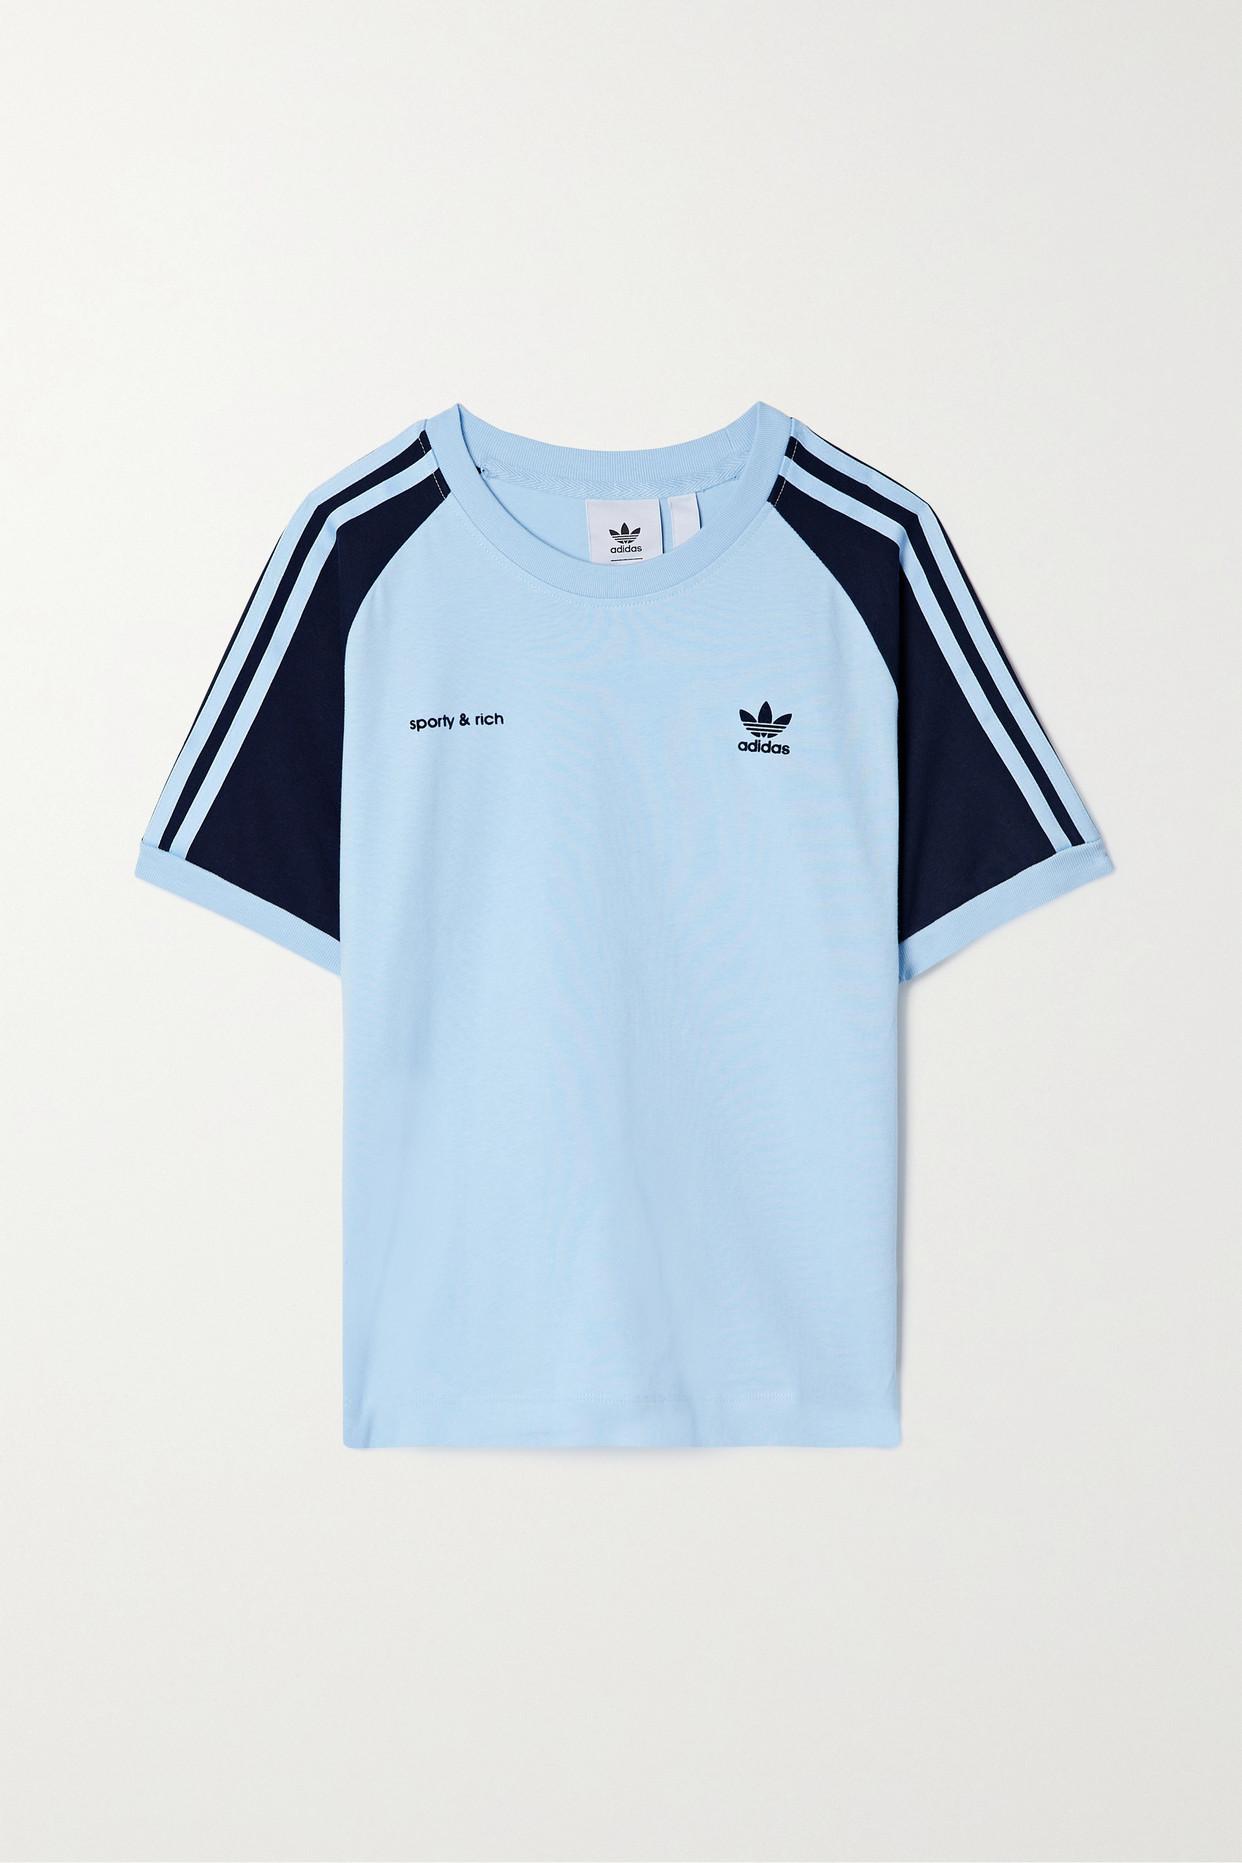 adidas Originals + Sporty & Rich Two-tone T-shirt in Blue | Lyst